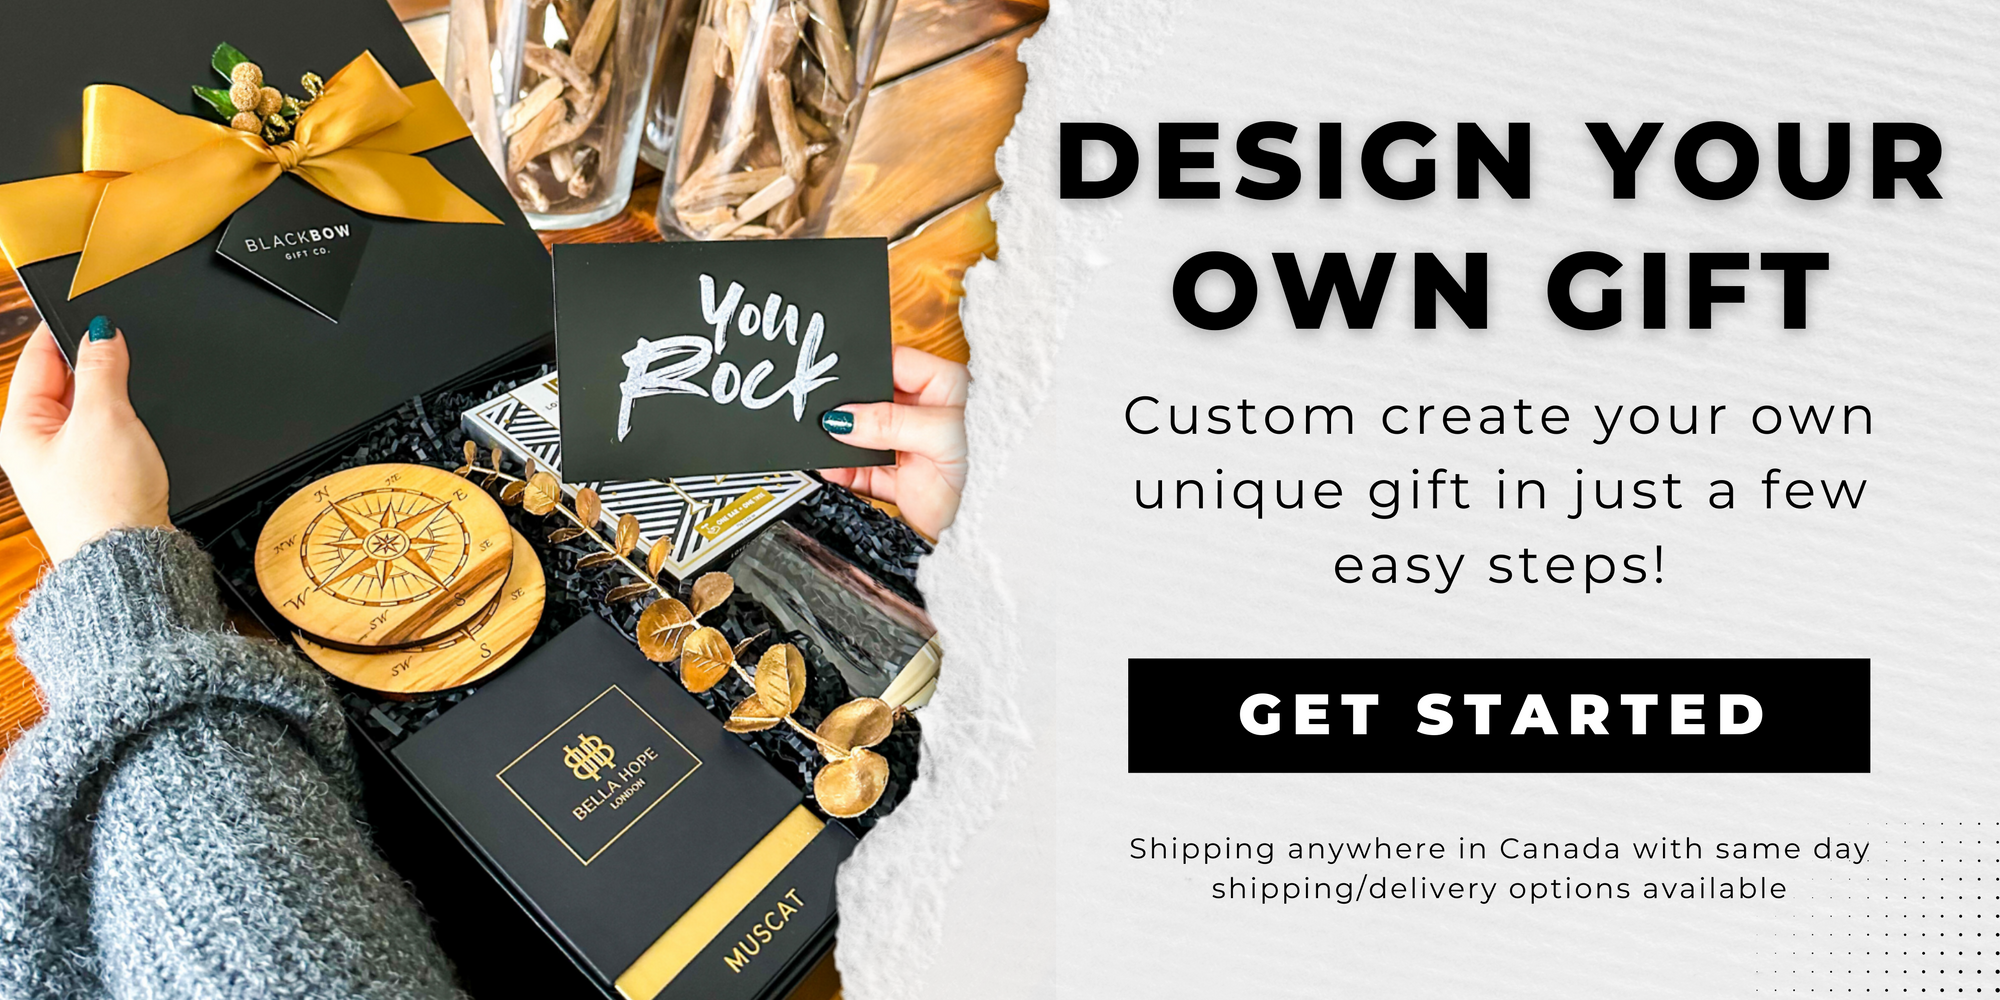 design your own gift online, design your own gift, how to make your own gift basket, how to make your own gift, design your own gift basket, unique gifts, creative gifts, create your own gift basket online, create your own gift online, one of a kind gifts, luxury gifts